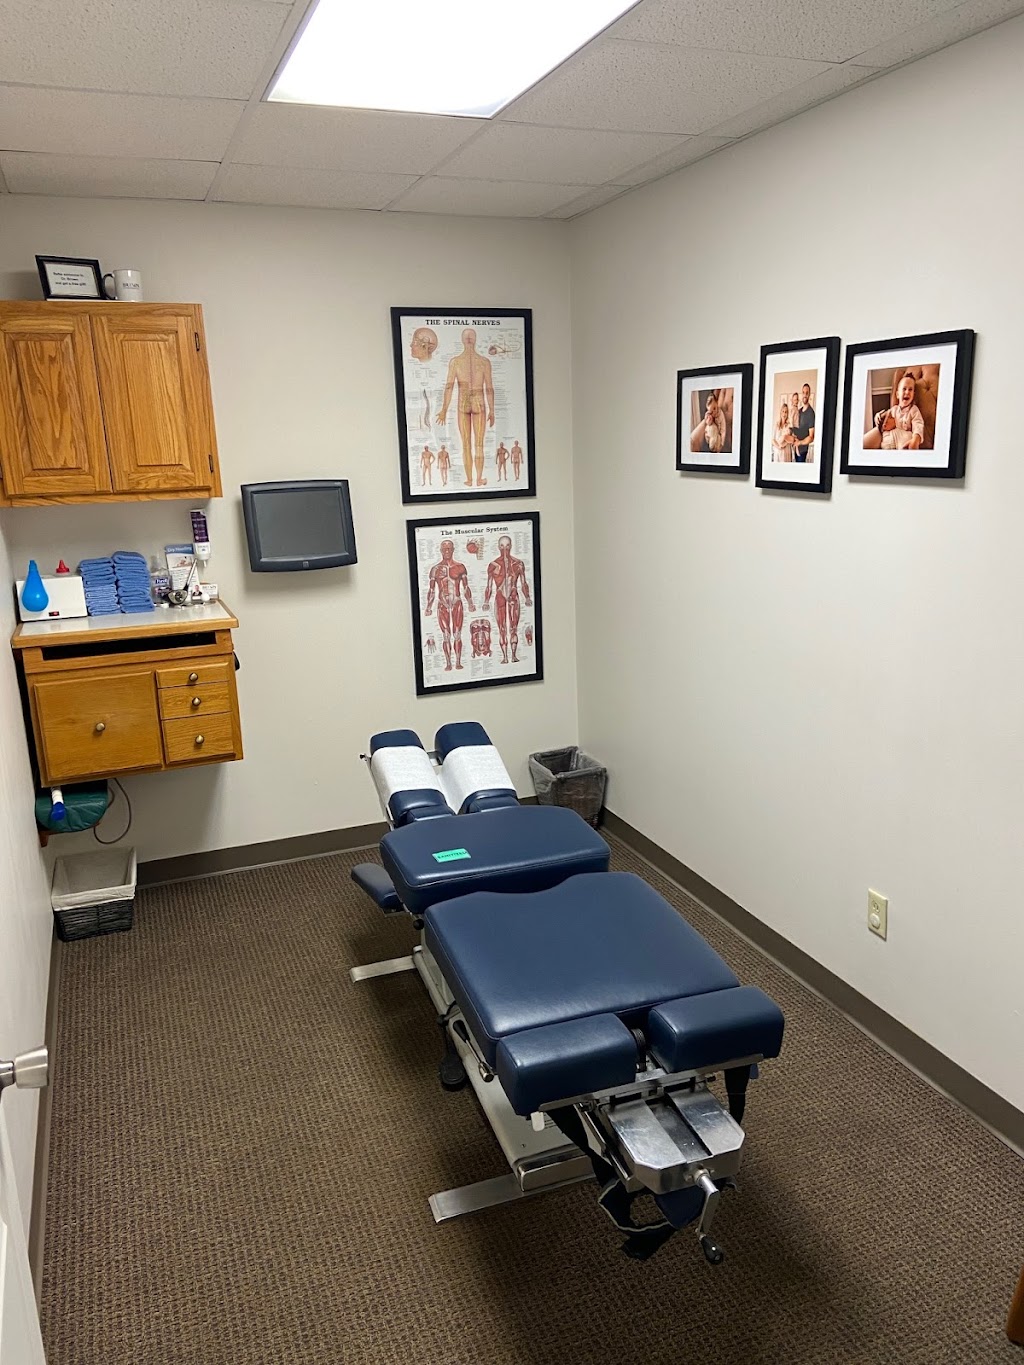 Premier Rehab: Chiropractic and Pain | 4460 N Illinois St, Swansea, IL 62226 | Phone: (618) 236-3738